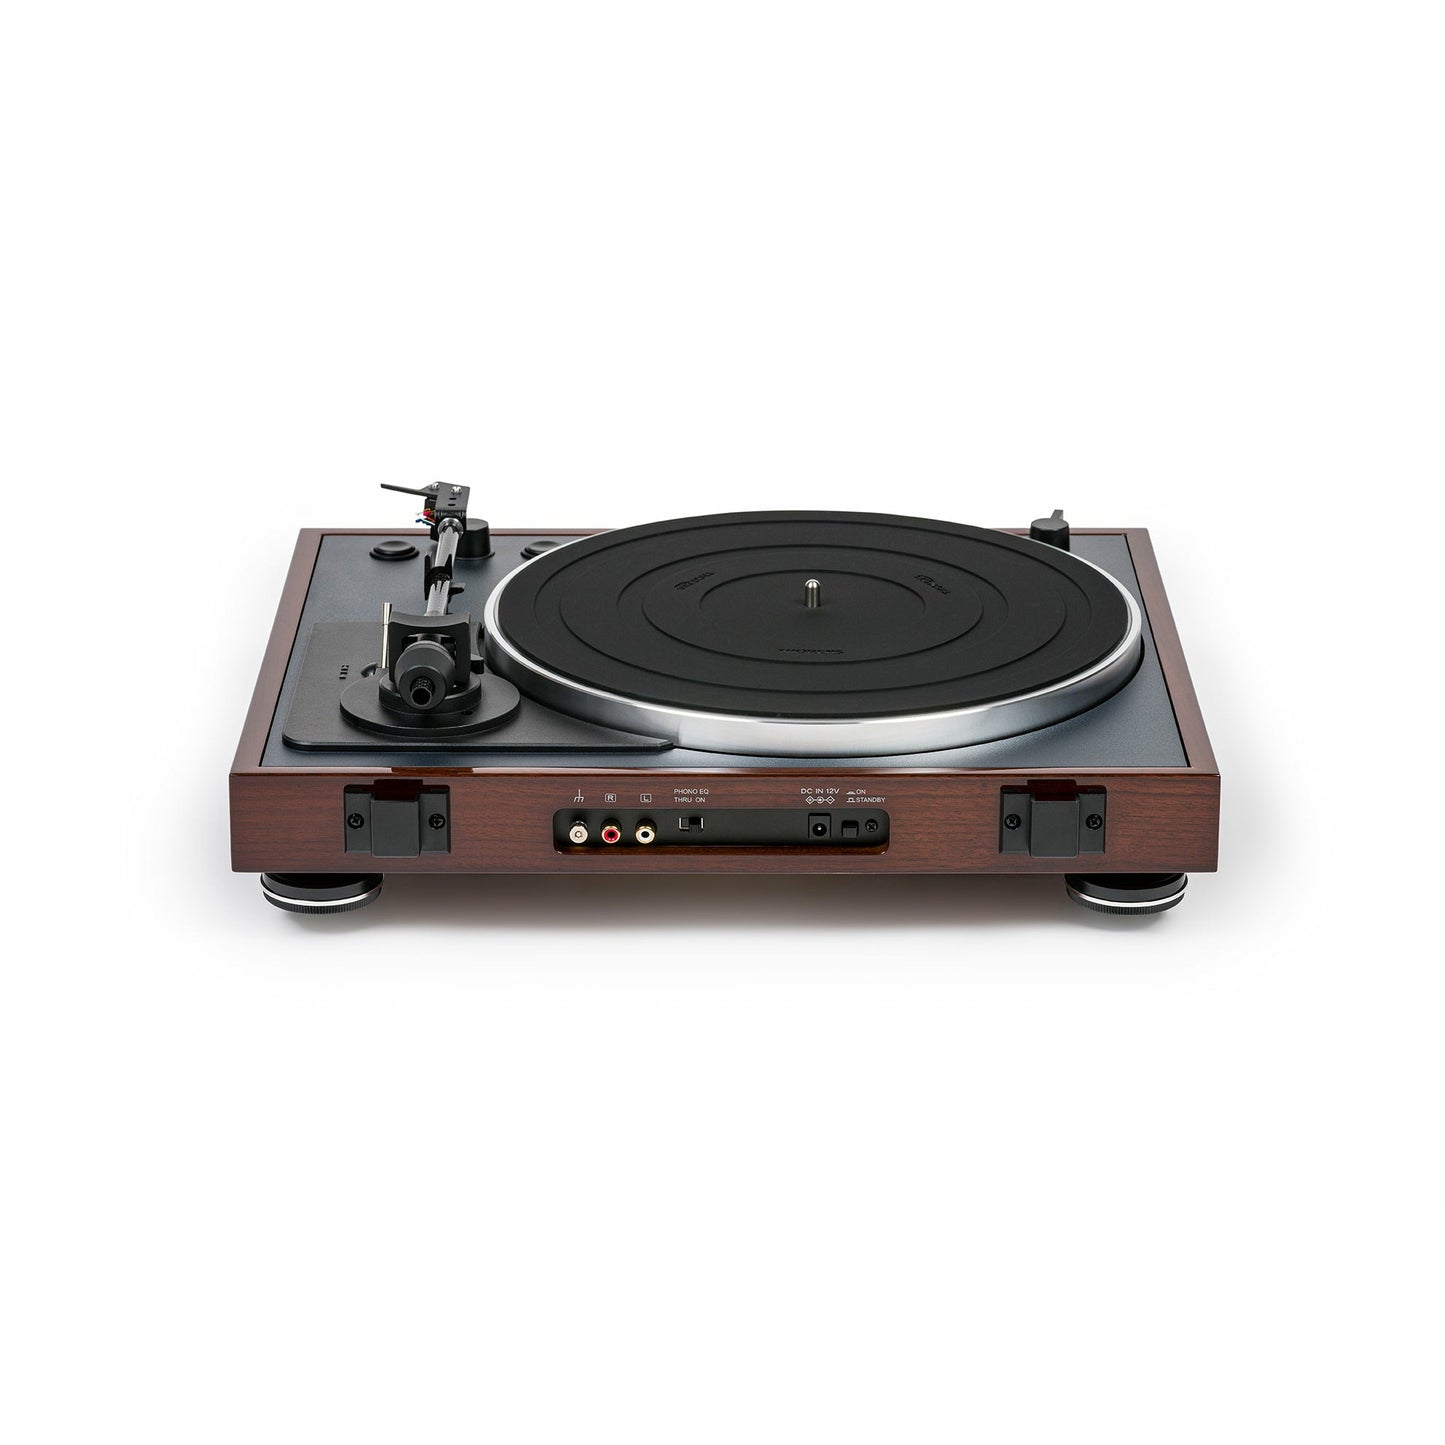 Thorens - TD 102 A - Fully Automatic Turntable